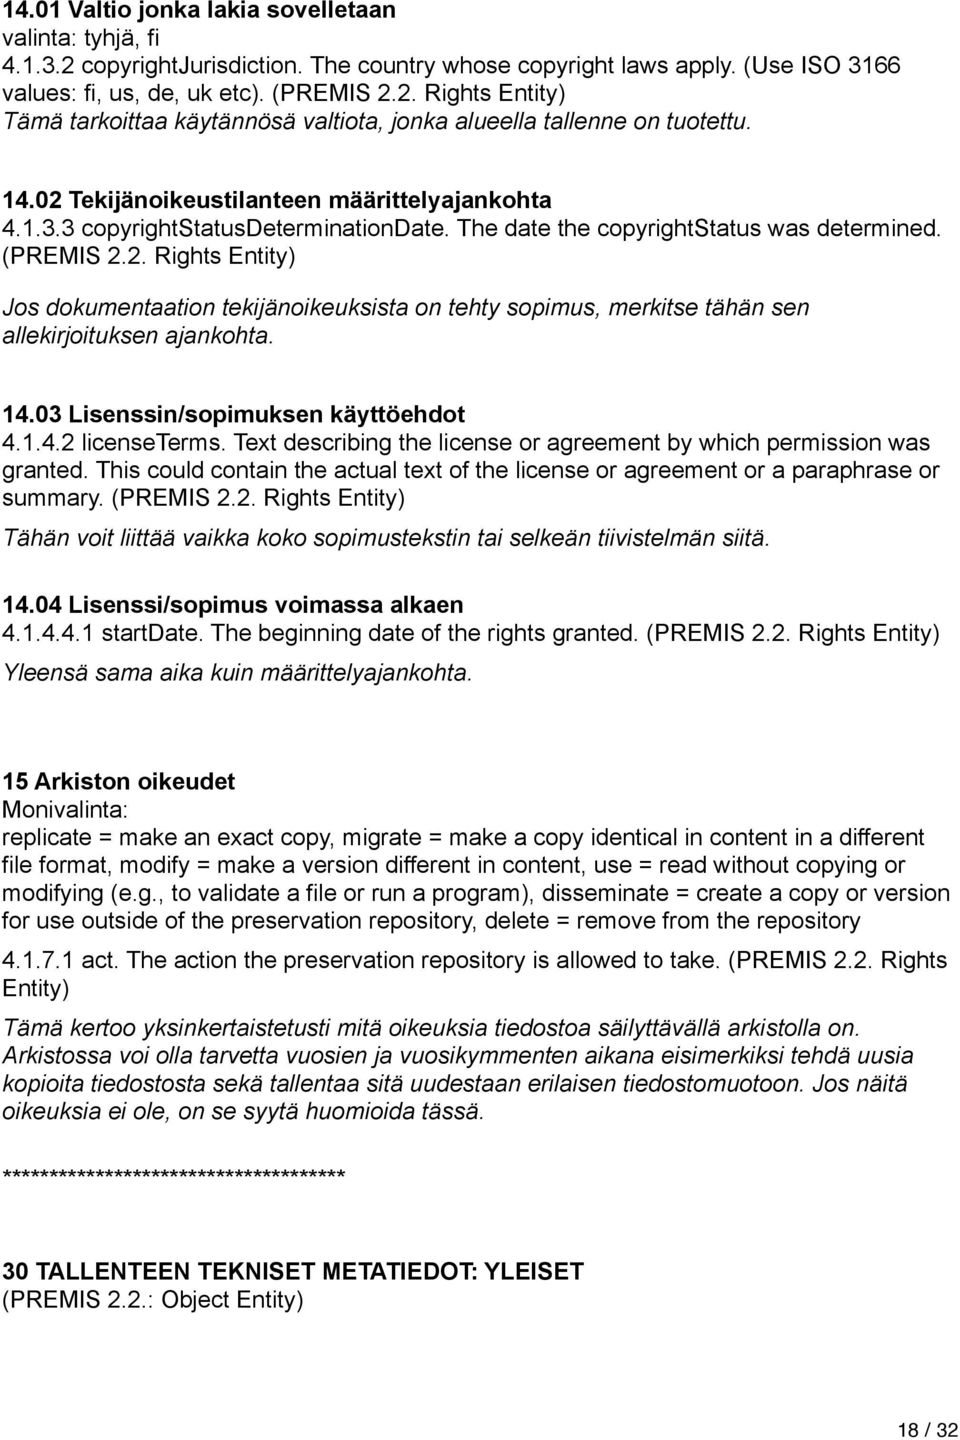 14.03 Lisenssin/sopimuksen käyttöehdot 4.1.4.2 licenseterms. Text describing the license or agreement by which permission was granted.